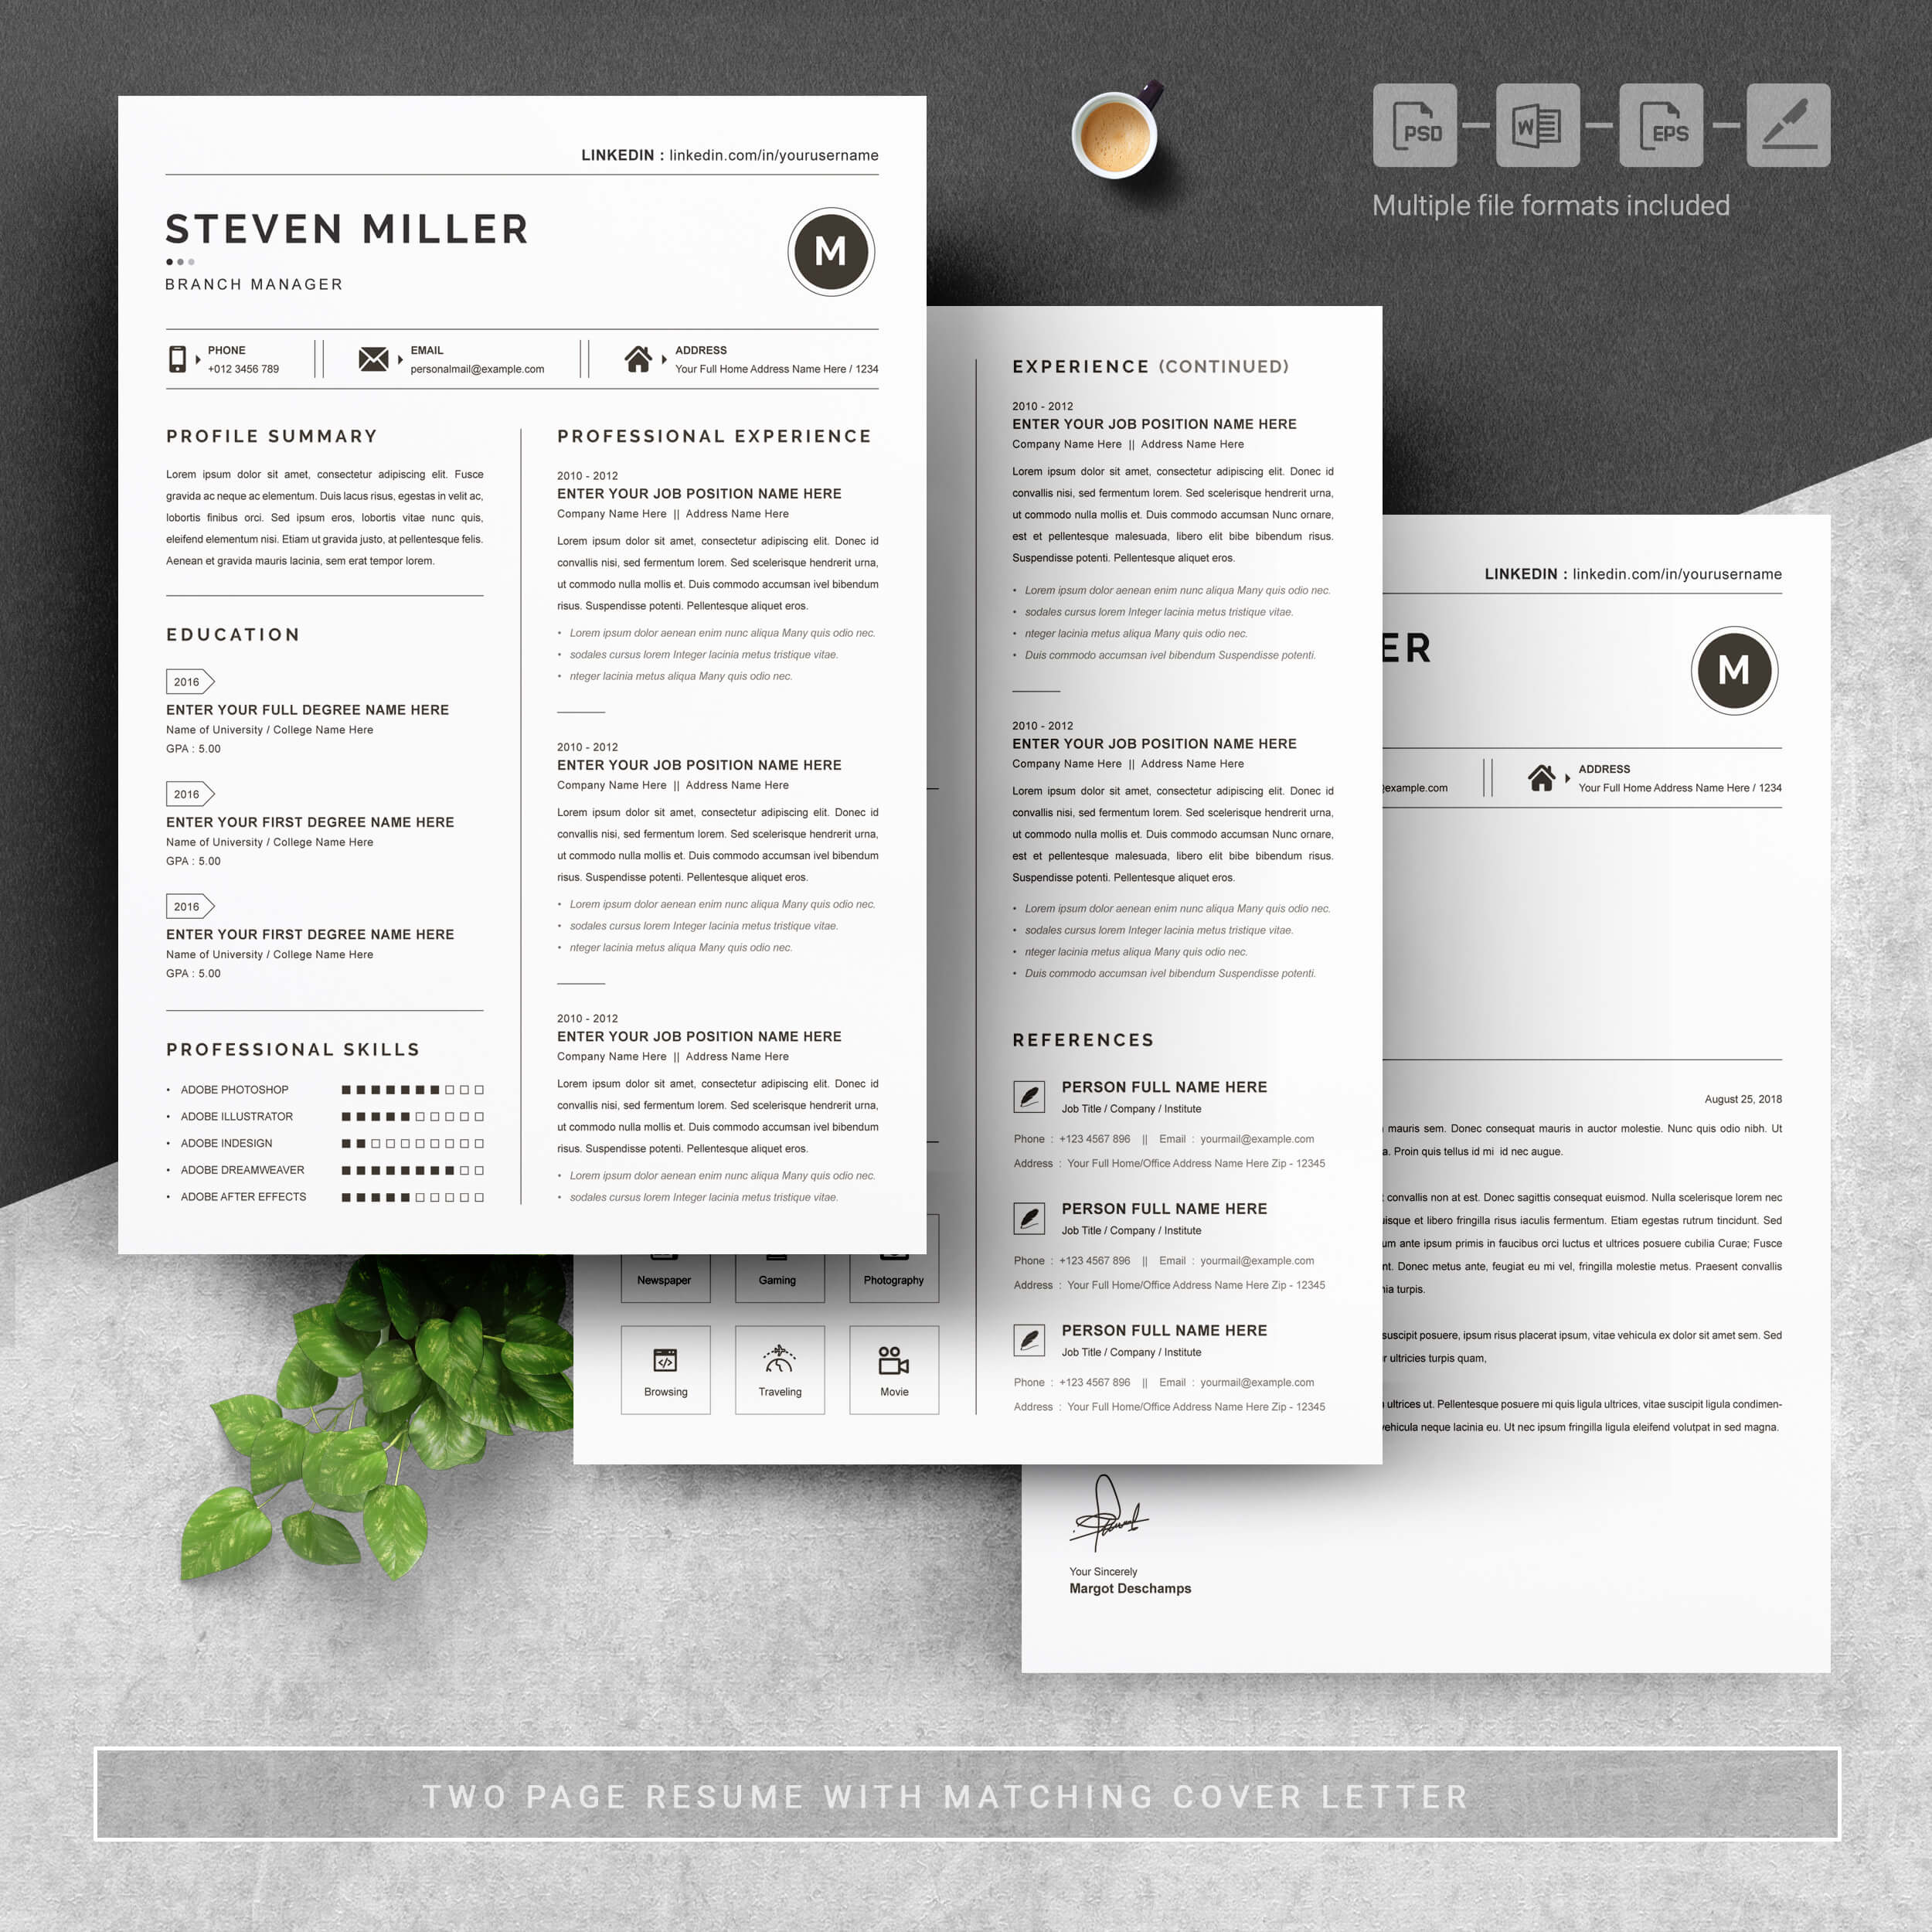 04 3 pages free resume design template 1 261